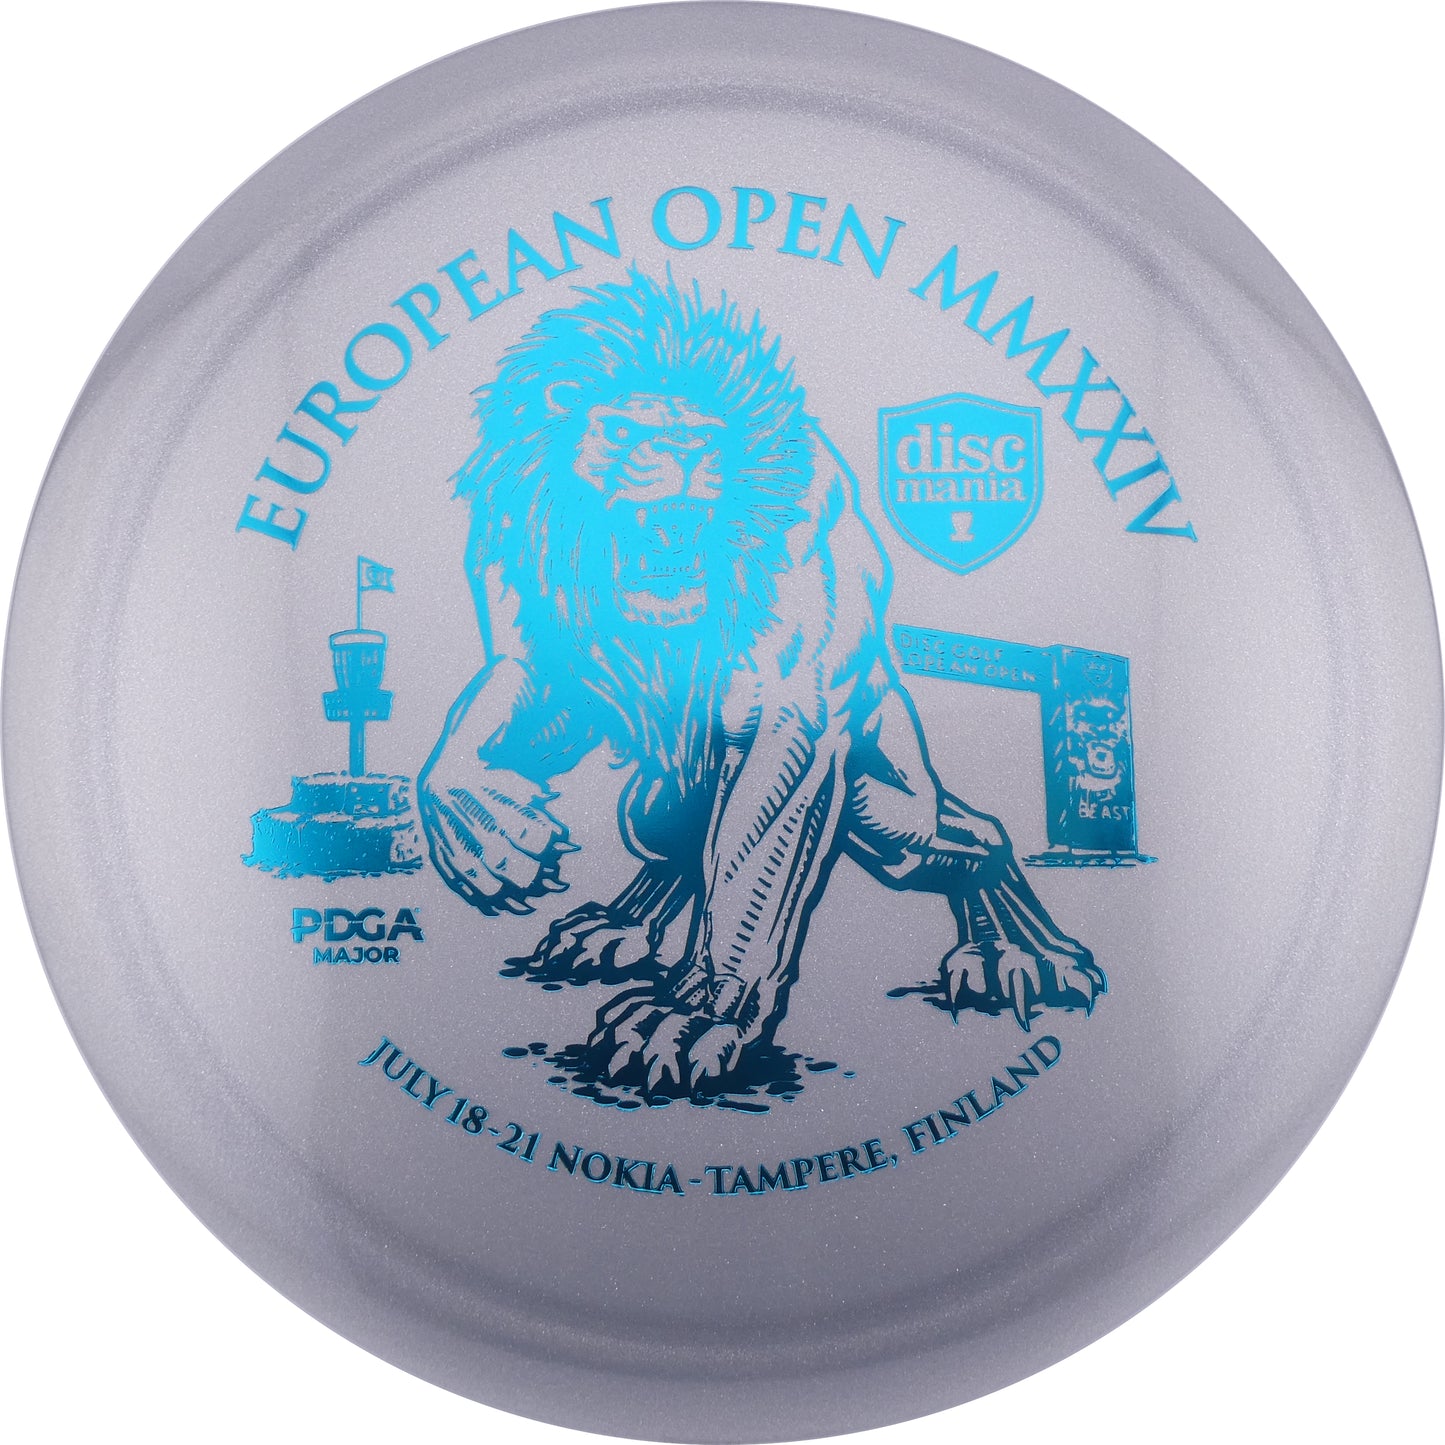 European_Open_Neo_Forged_Function_173g-6